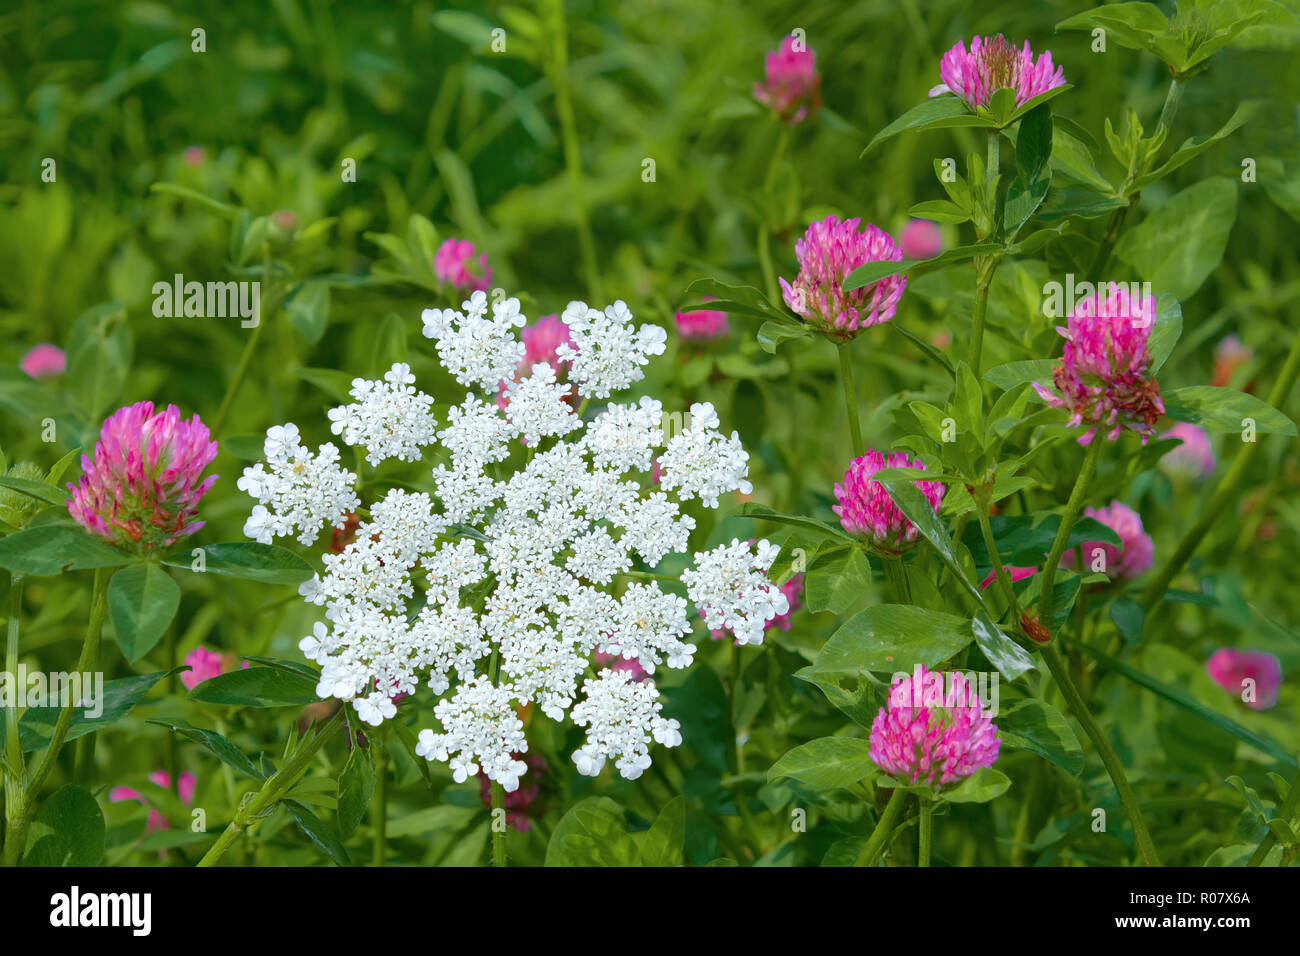 Clover and plant of Apiaceae family flowering in a meadow Stock Photo